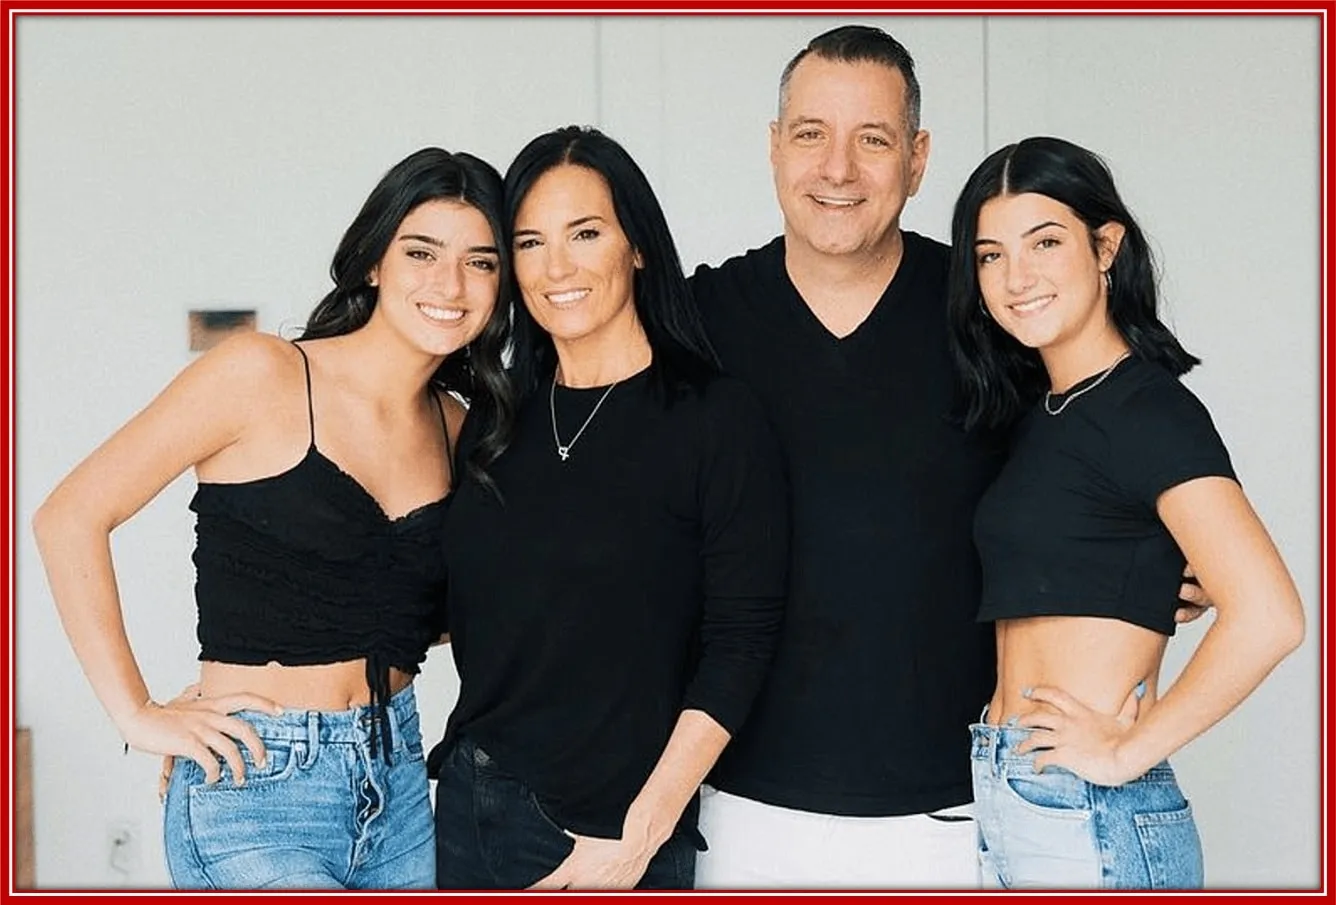 We know the D'Amelio family as the first family of TikTok.